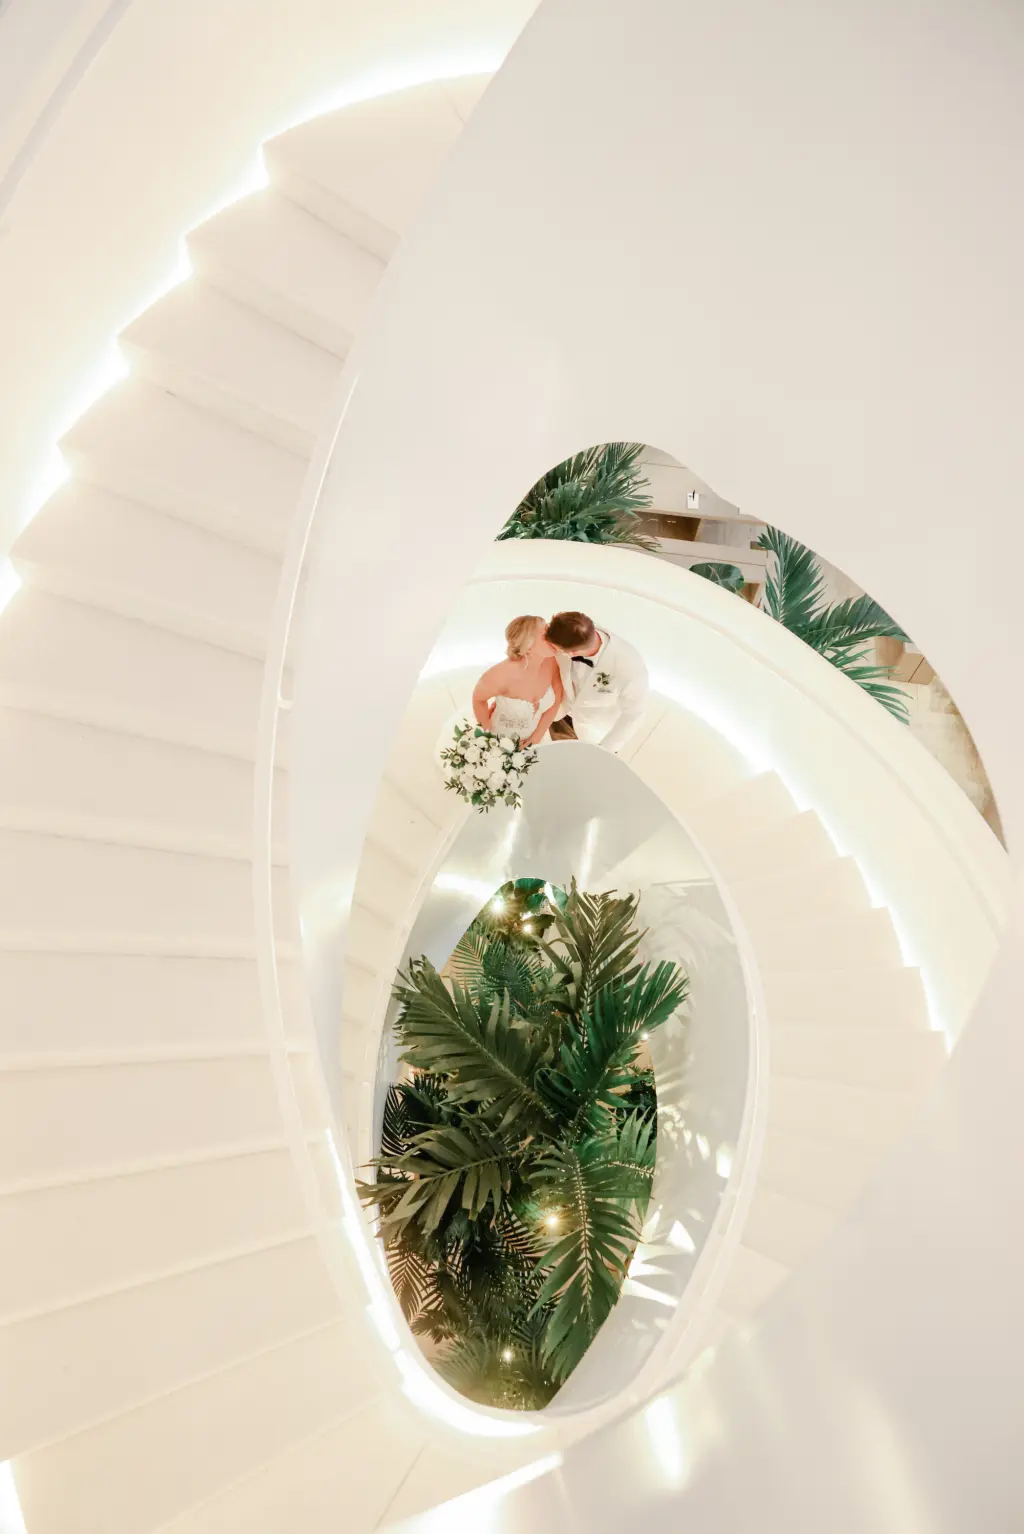 Intimate Bride and Groom Wedding Portrait on Spiral Staircase | Tampa Bay Photographer Lifelong Photography | Downtown Tampa Wedding Venue The Edition Hotel Water Street Lobby Stairs | Planner Breezin' Weddings